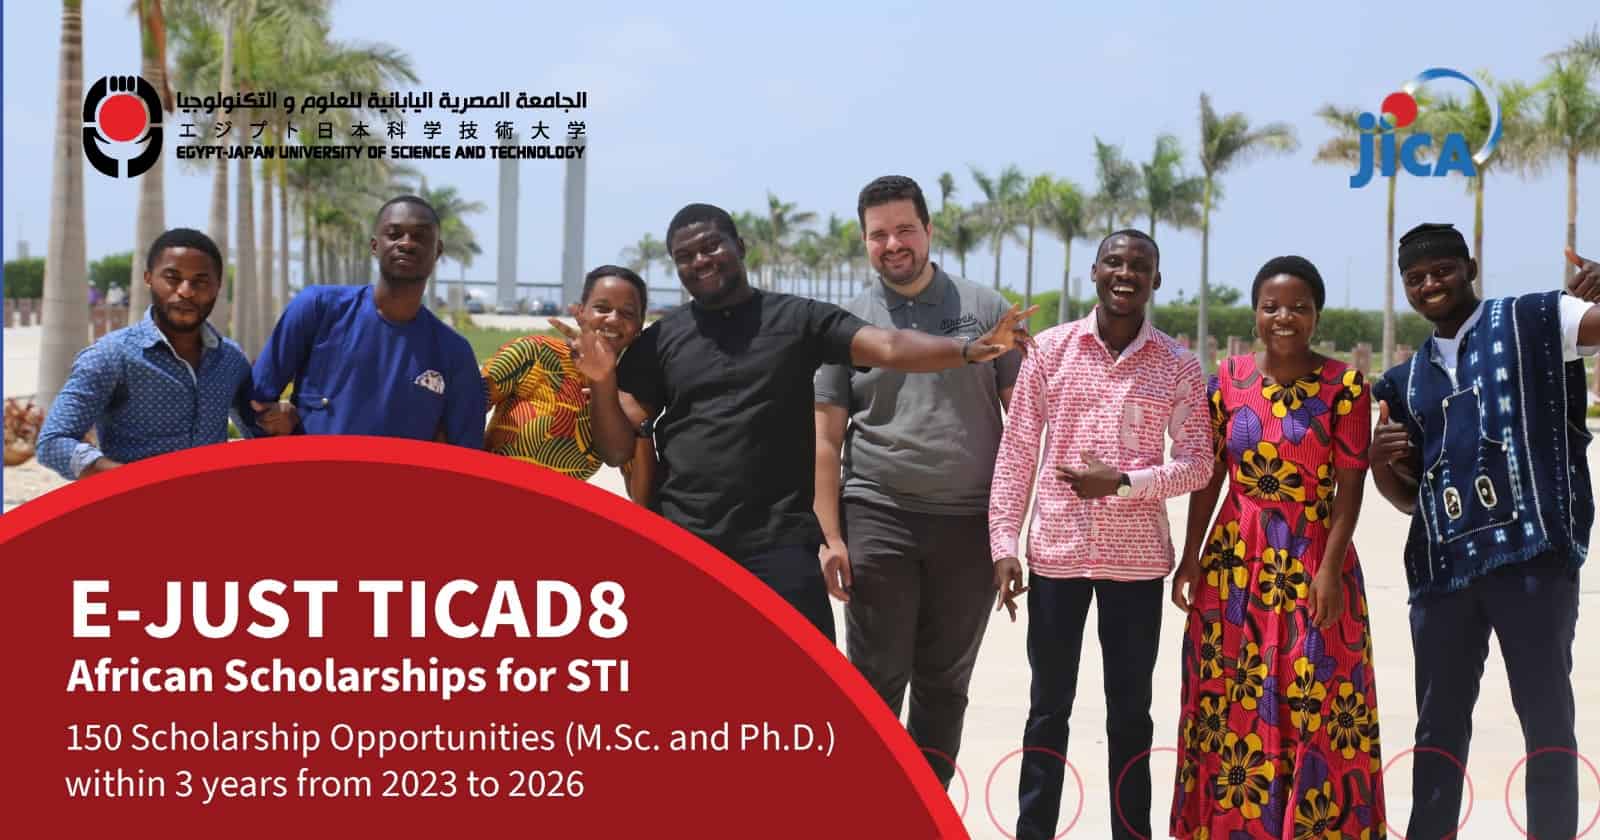 E-JUST TICAD8 African Scholarships